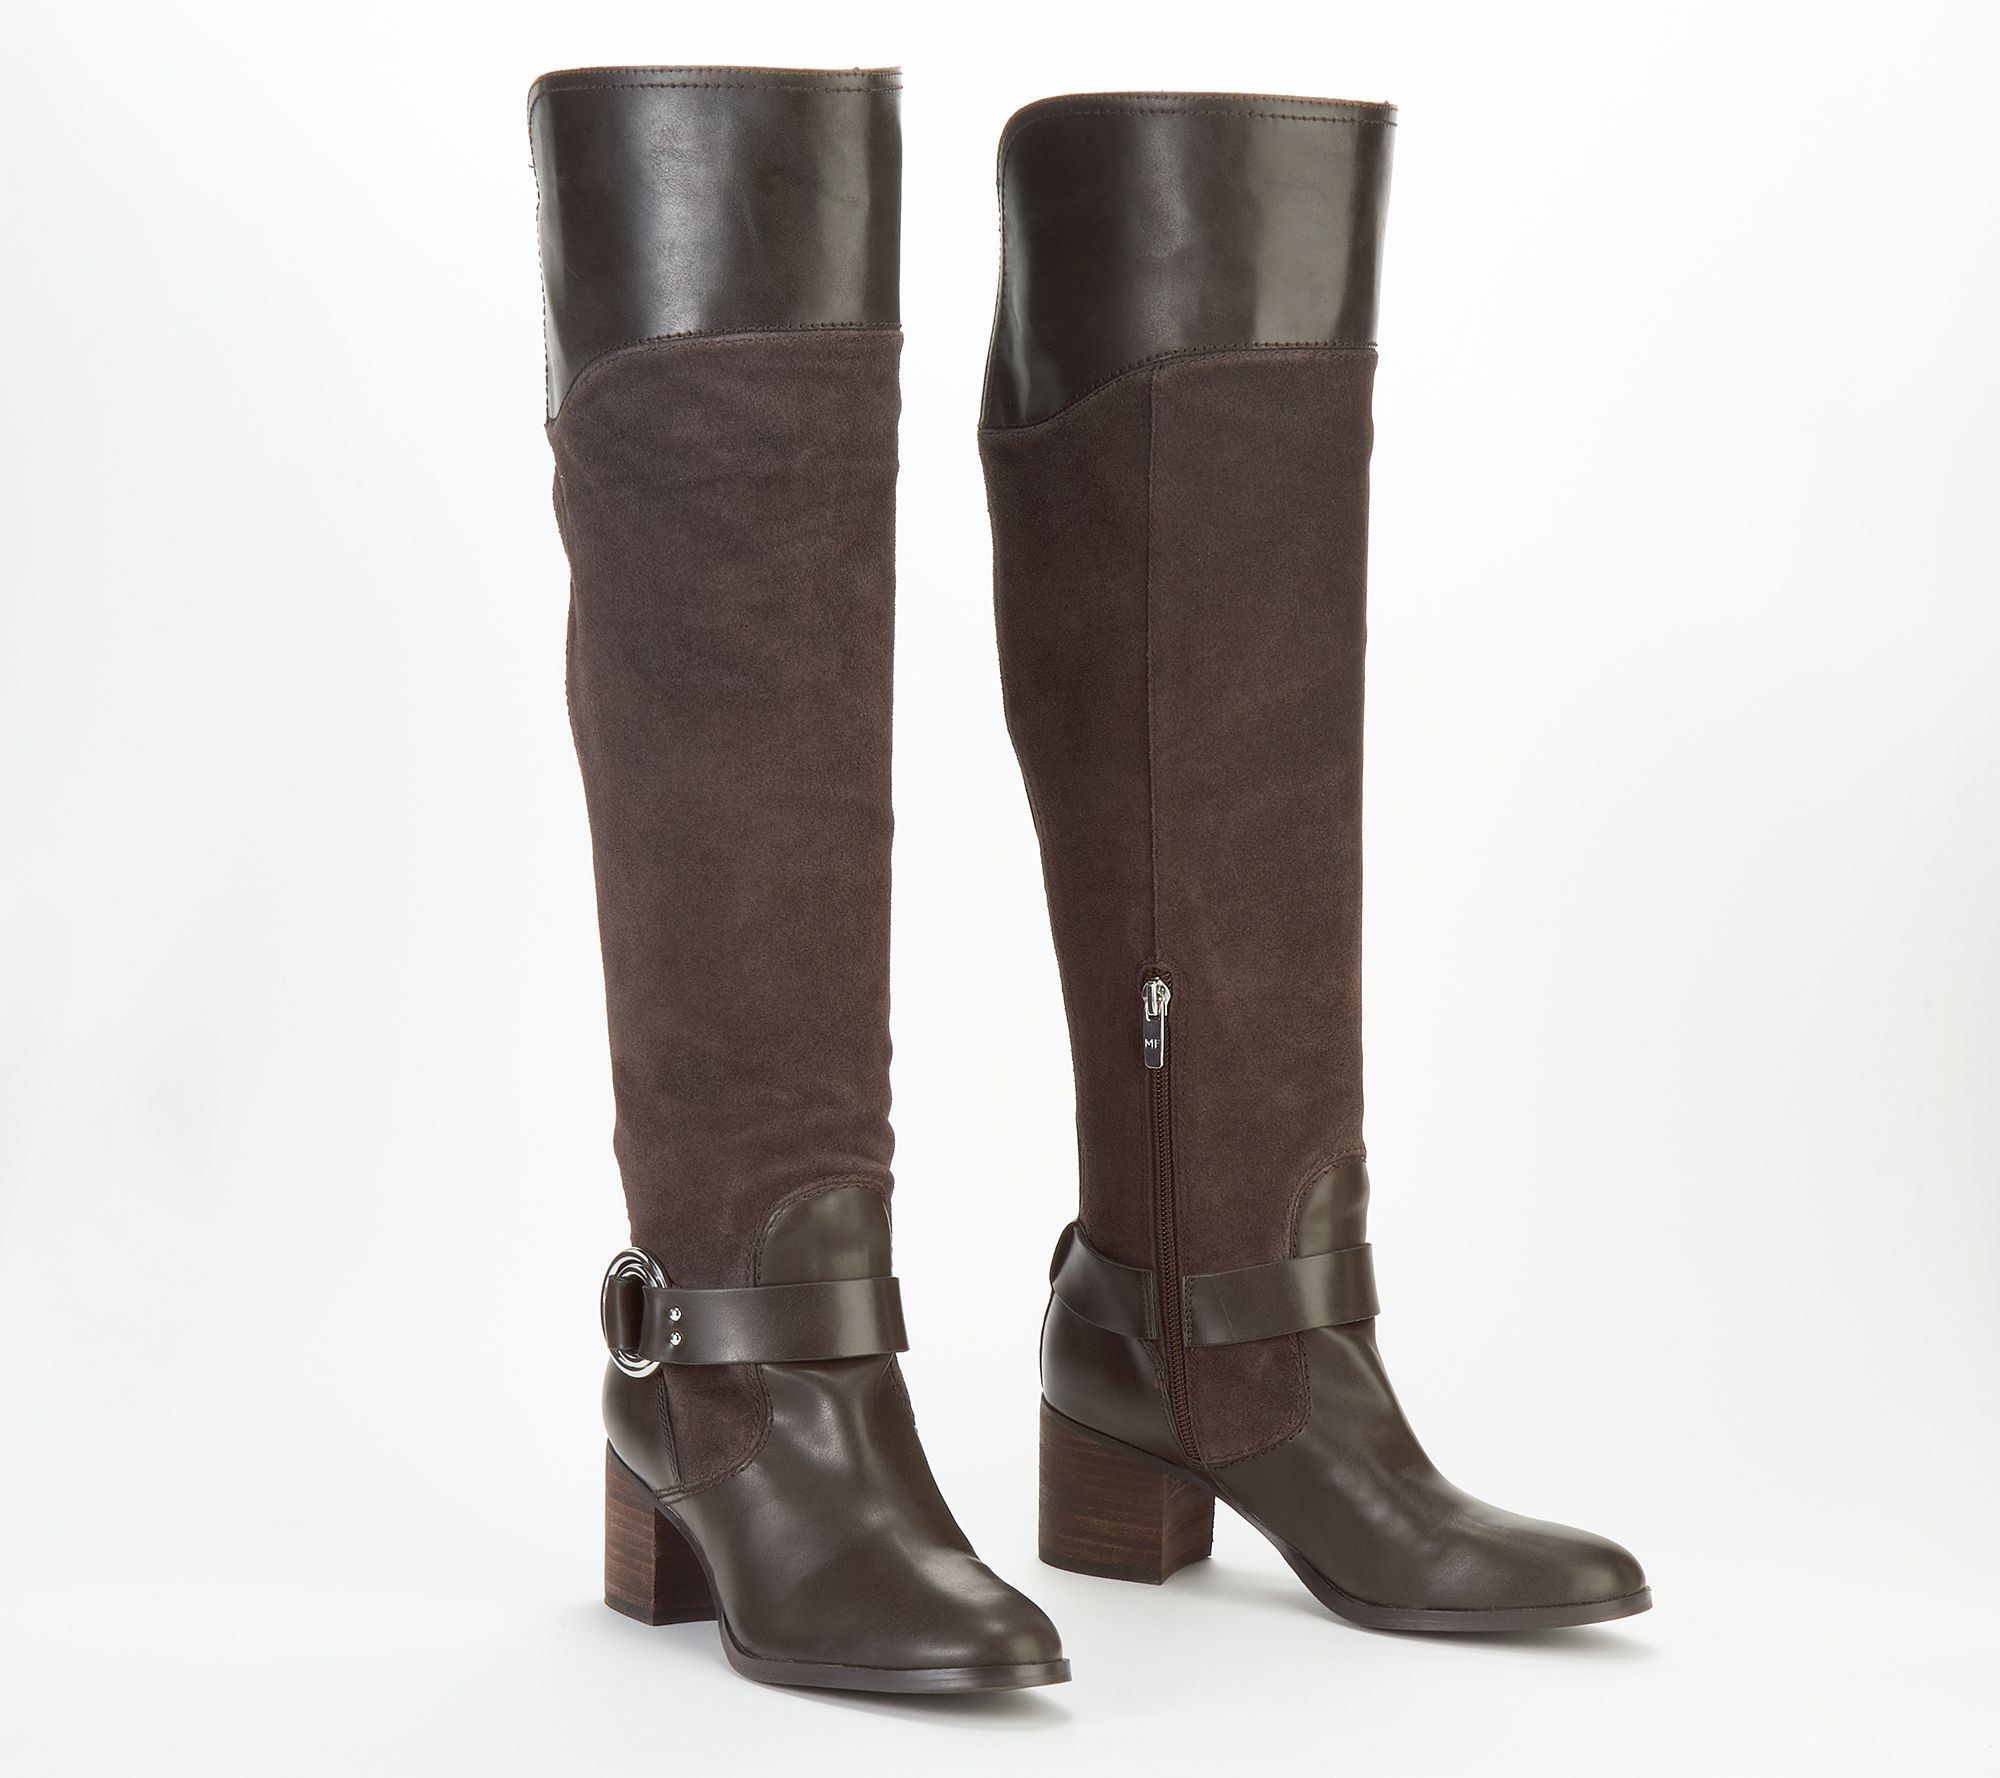 marc fisher wide calf over the knee boots